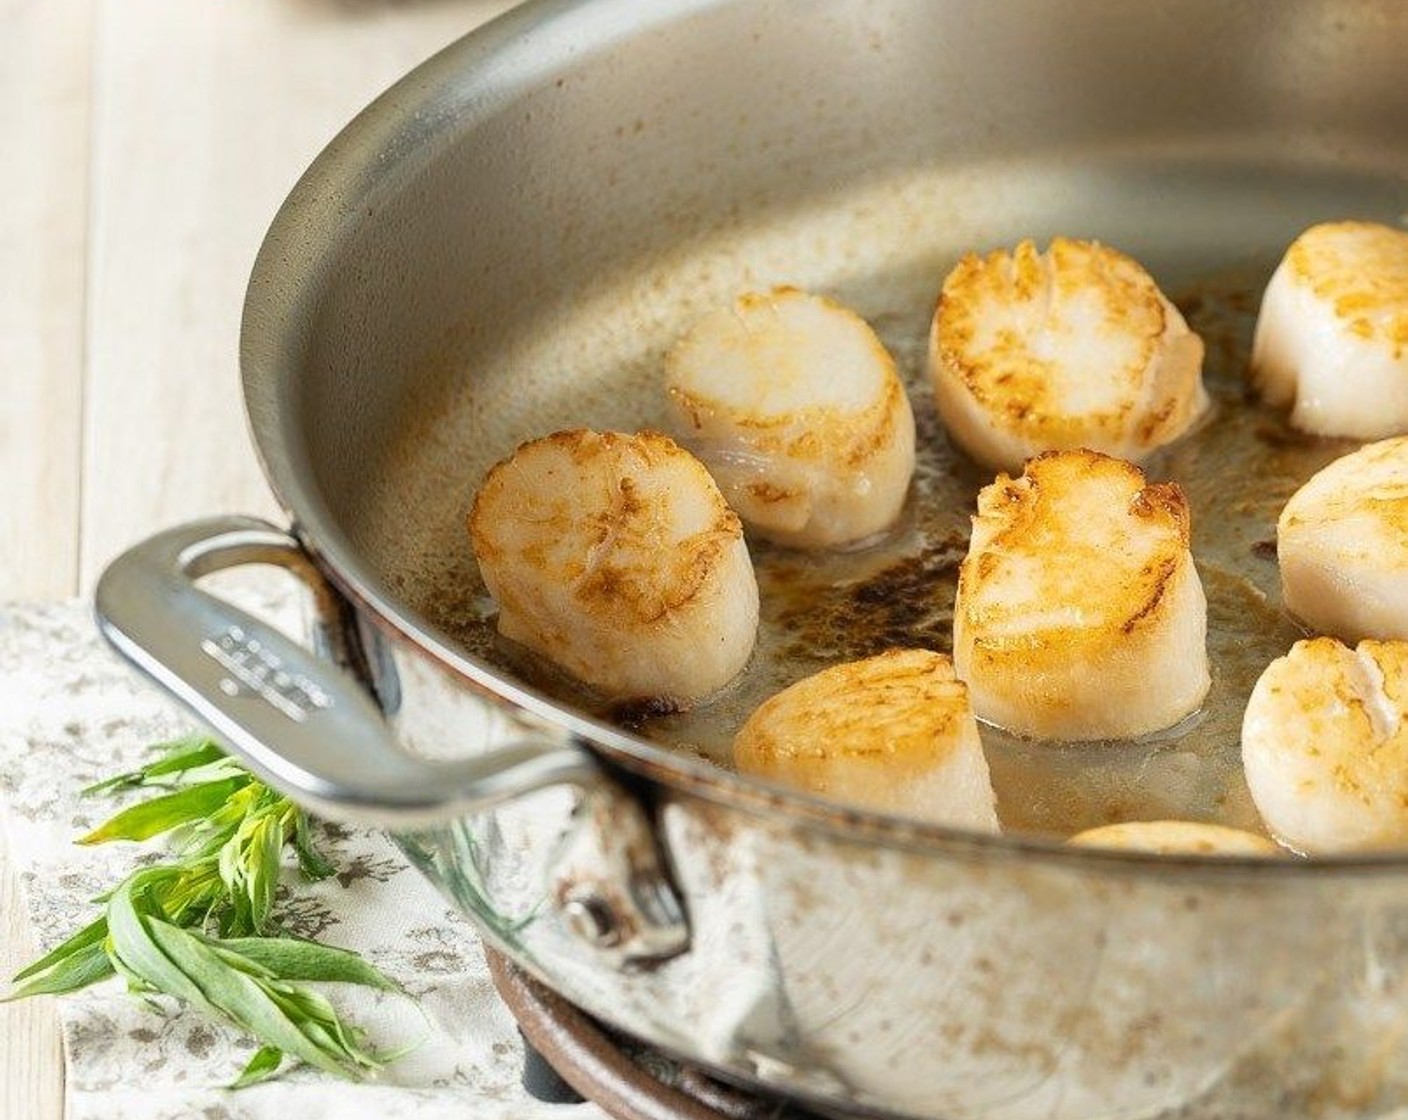 step 2 Heat Canola Oil (1 Tbsp) in a large skillet over medium-high heat. When the oil is hot add scallops and cook for approximately 2 minutes per side depending on size. Flip scallops and cook for an additional 2 minutes.